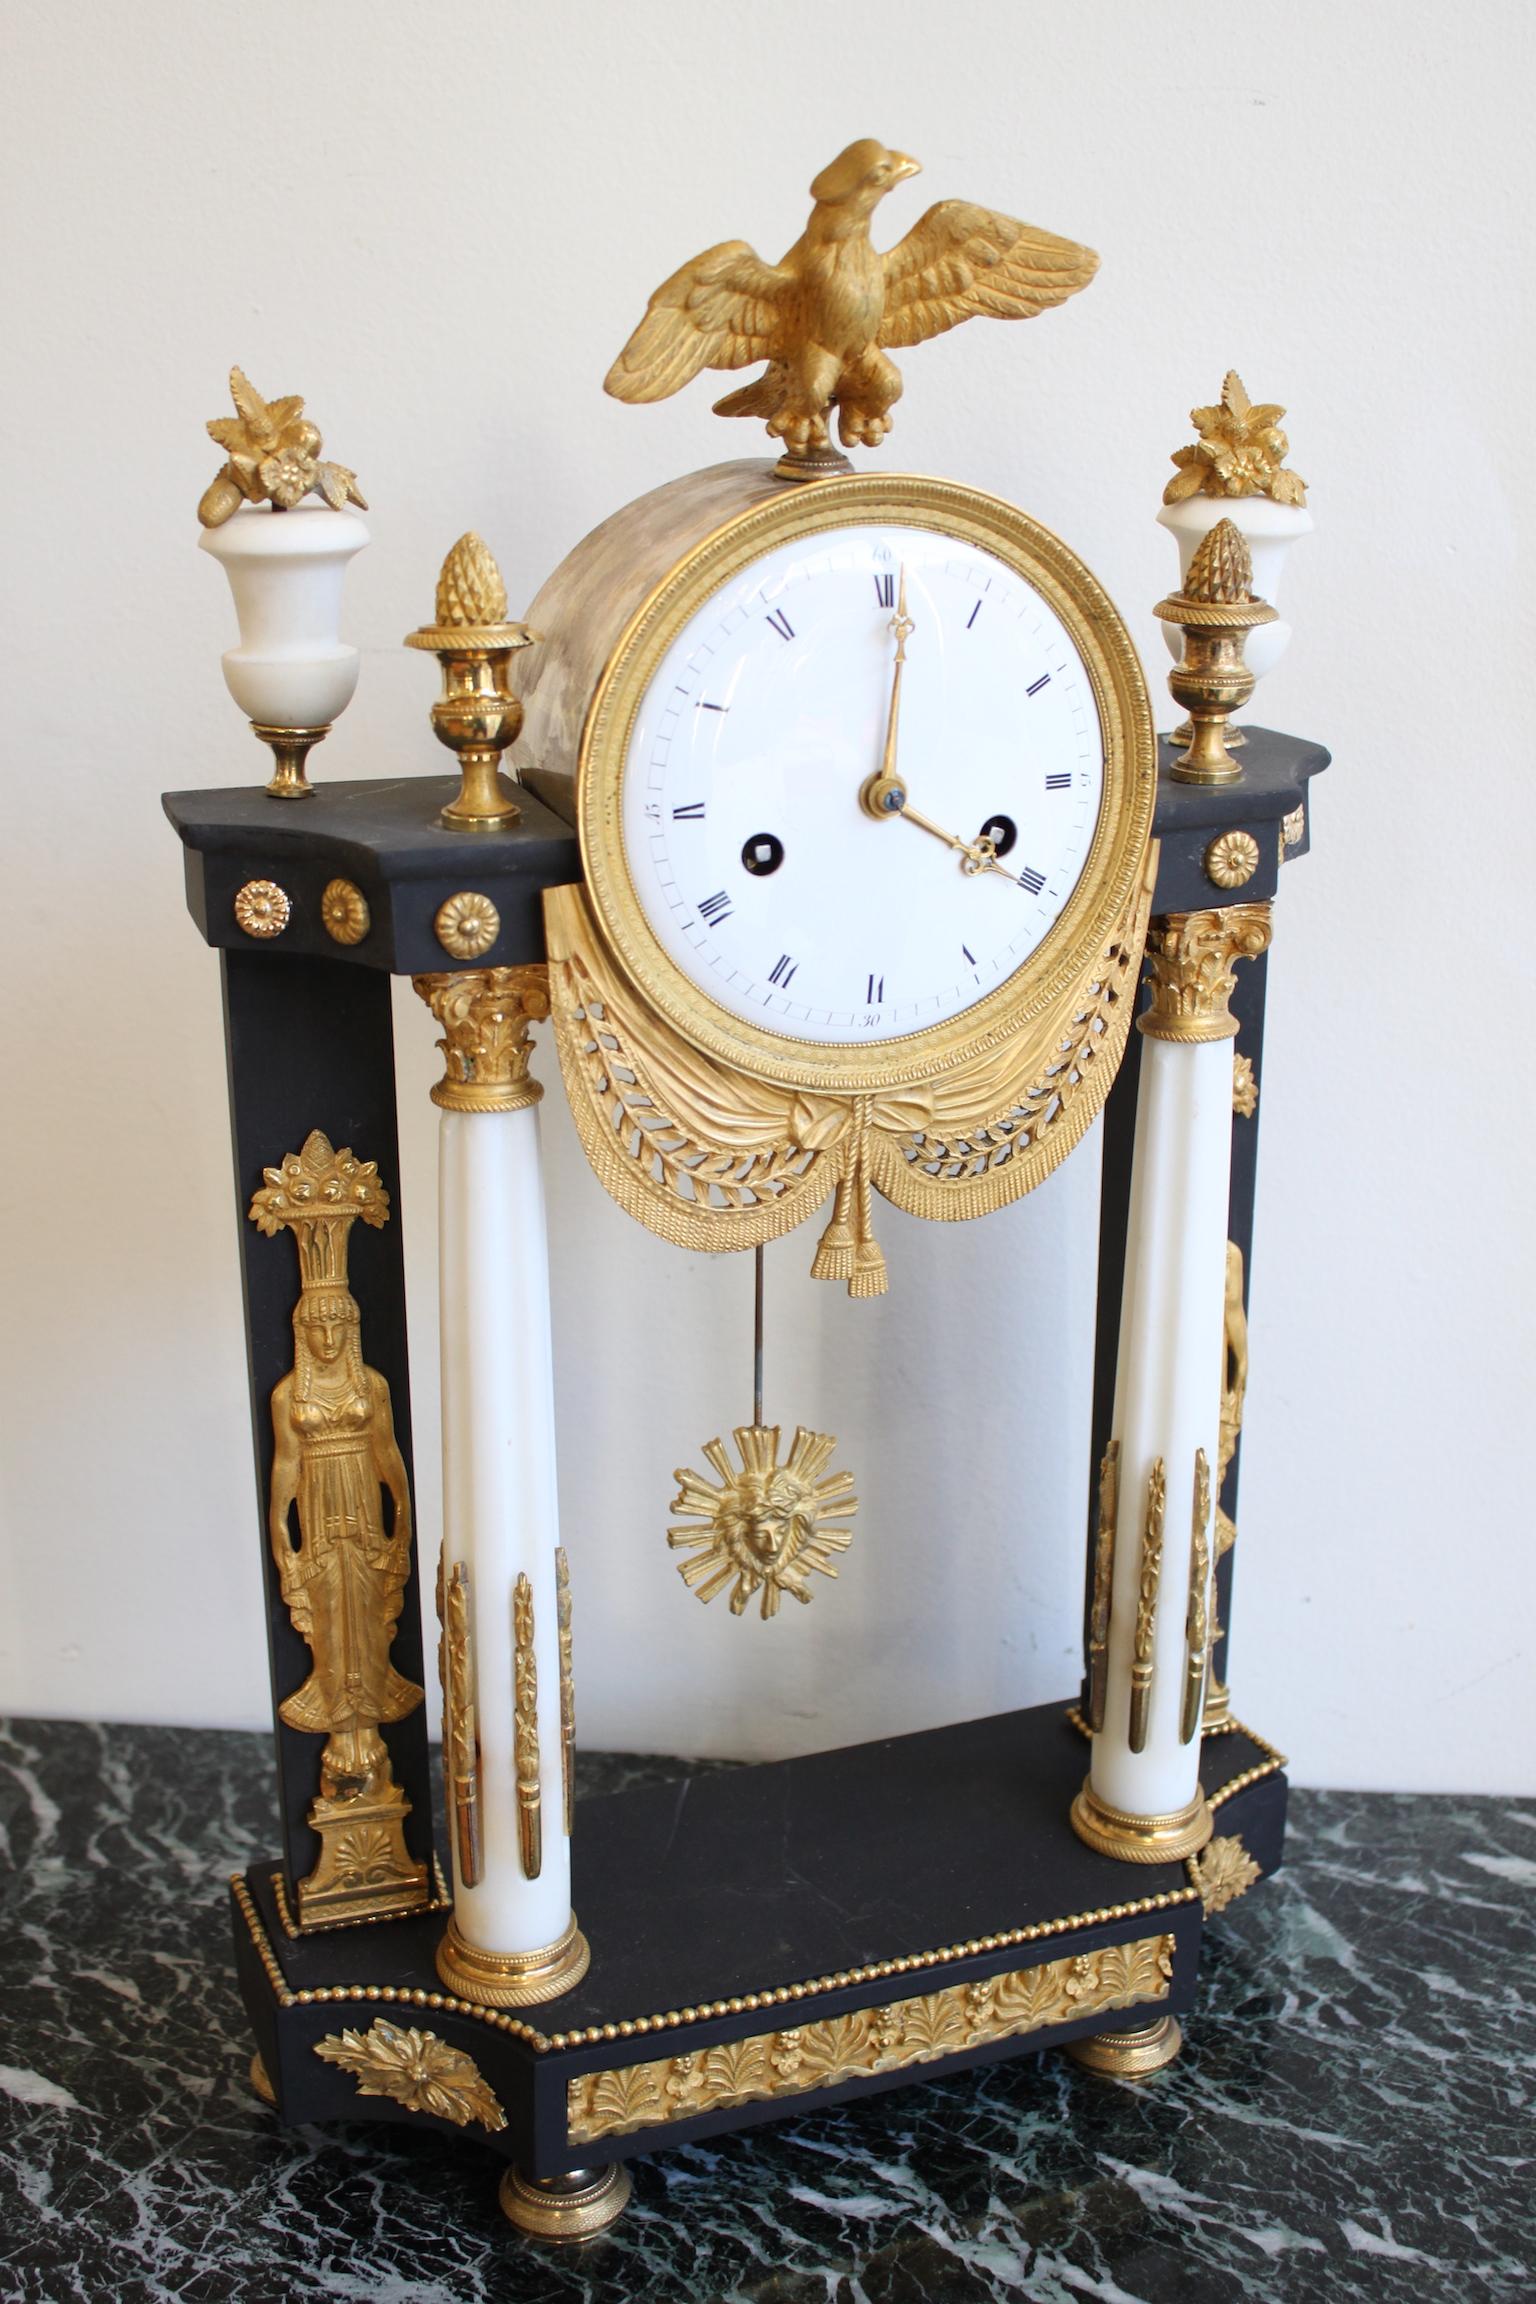 Empire clock, return from Egypt, transition Louis XVI.
Clock in white and black marble, decorated with Egyptian figures in gilded bronze, and an eagle. Columns with Corinthian capital.
In working order. Wire movement.
Dimensions: height 46cm,